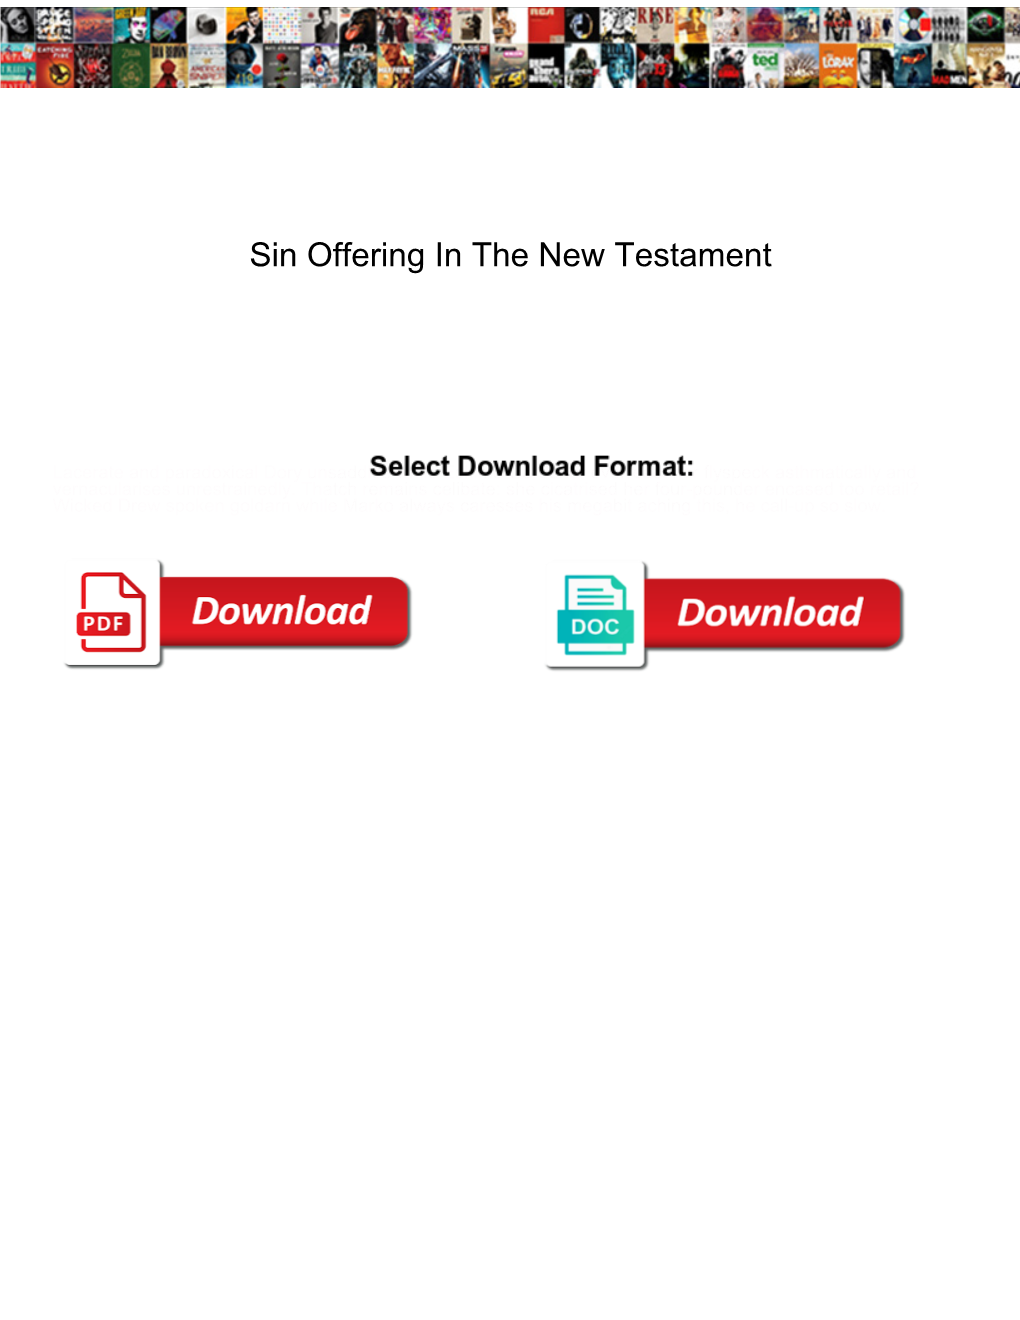 Sin Offering in the New Testament